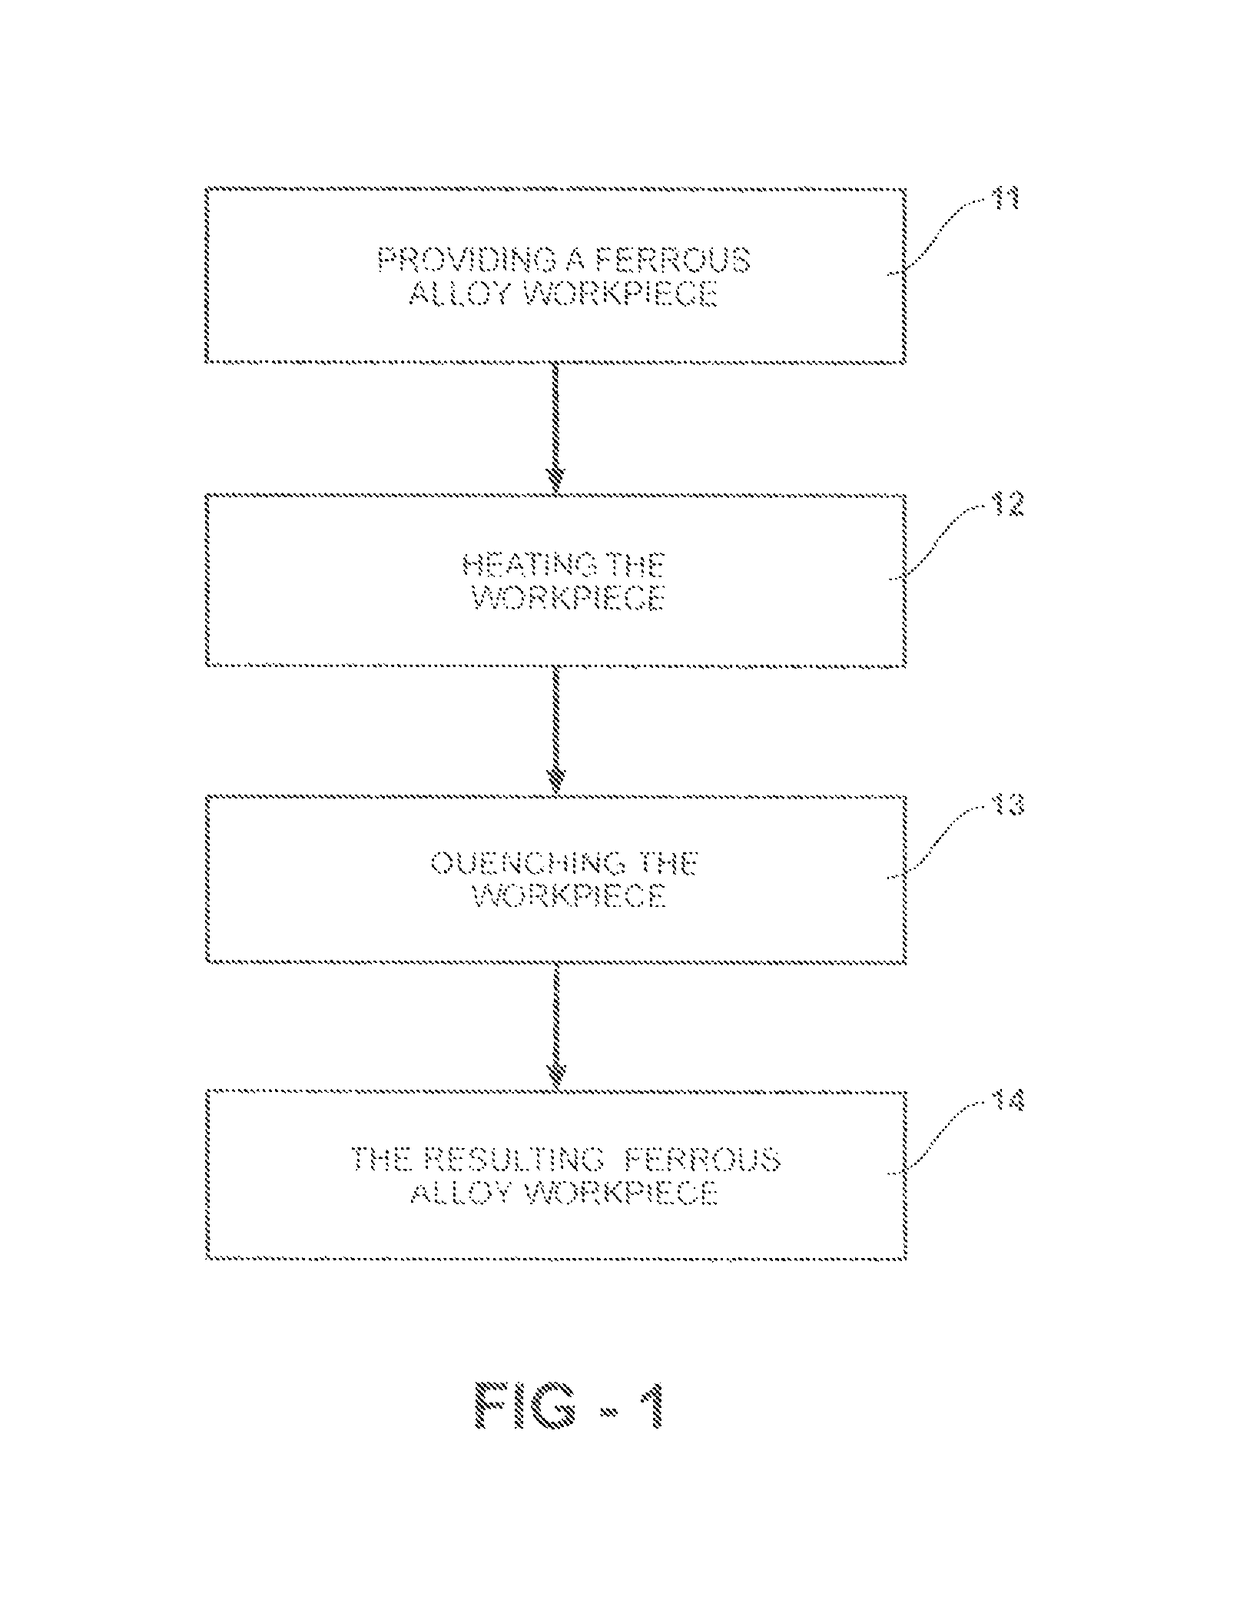 Microtreatment of iron-based alloy, apparatus and method therefor, and articles resulting therefrom